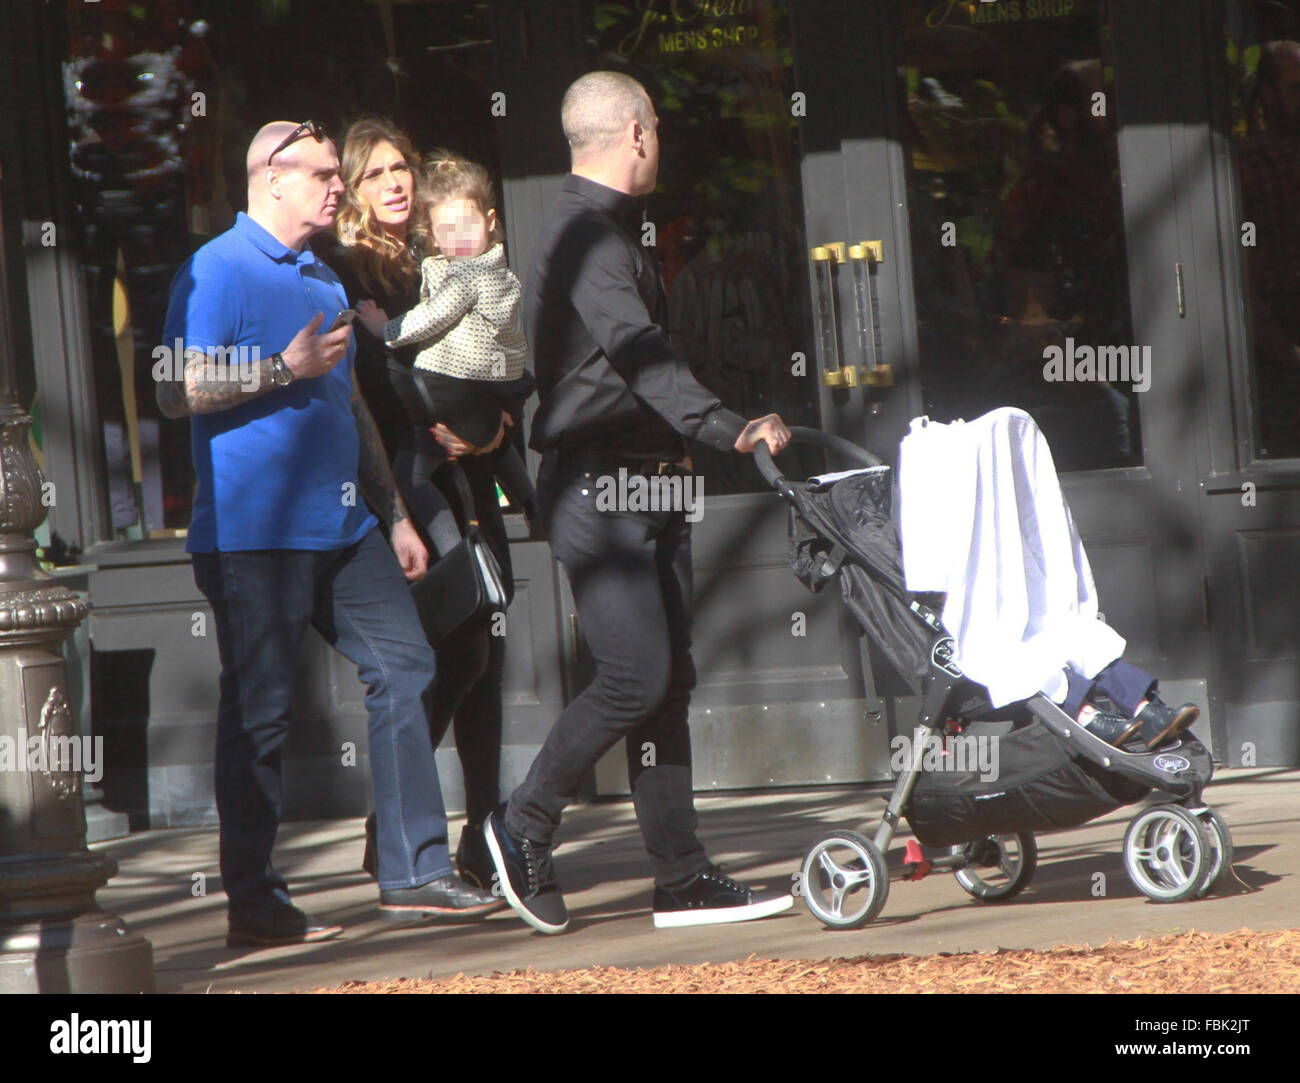 Robbie Williams takes his family shopping at The Grove in Hollywood  Featuring: Robbie Williams, Ayda Field, Theodora Rose Williams Where:  Hollywood, California, United States When: 17 Dec 2015 Stock Photo - Alamy